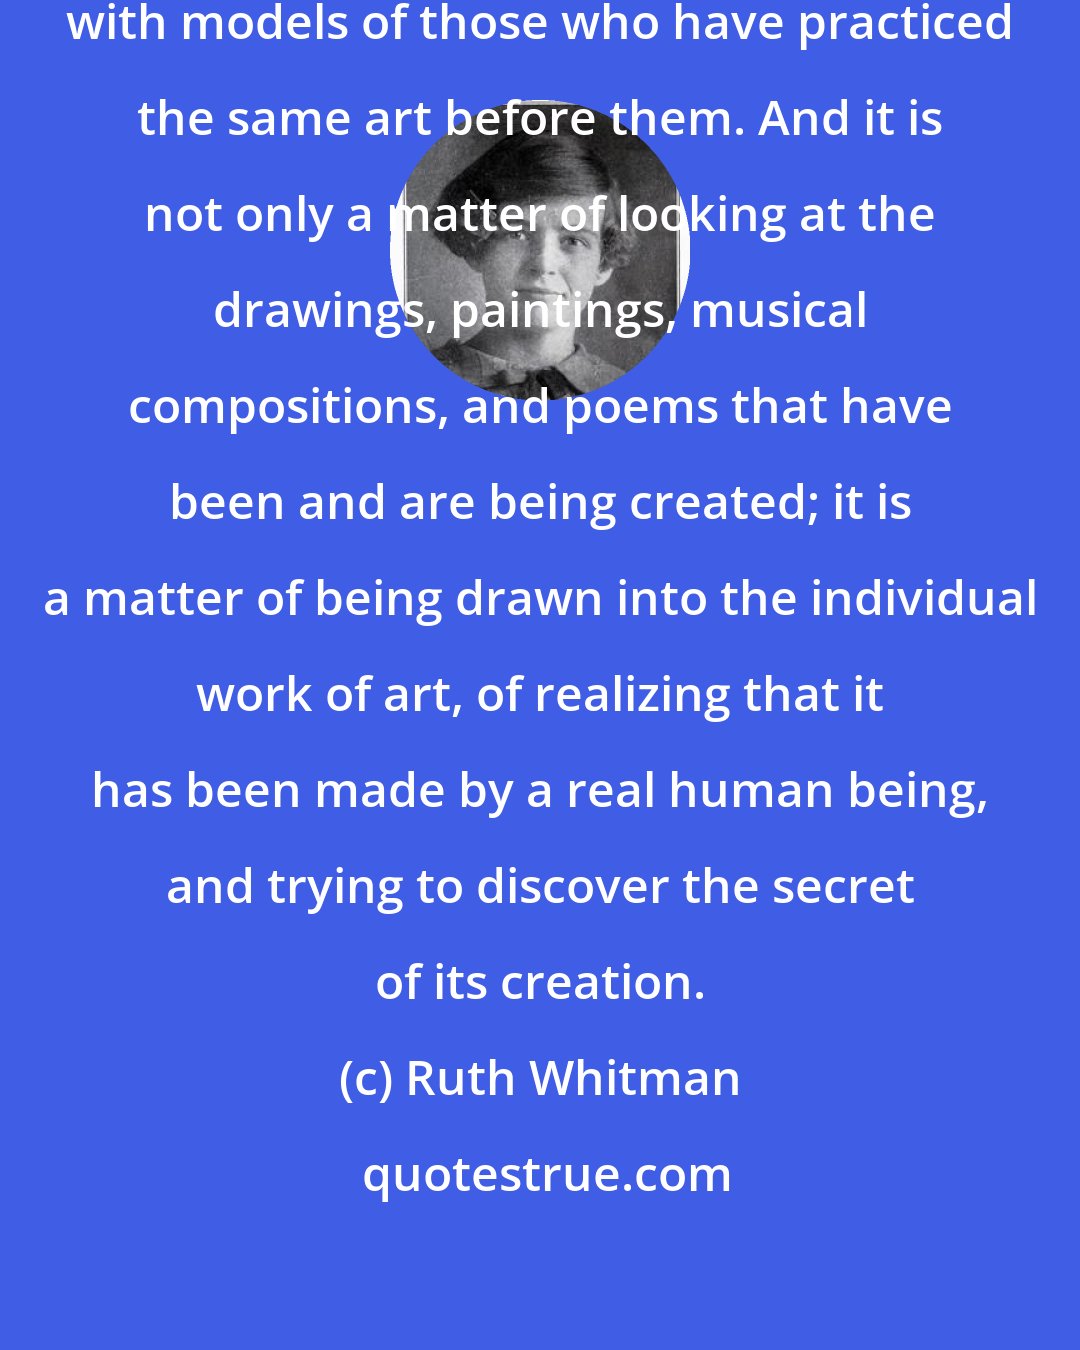 Ruth Whitman: In every art beginners must start with models of those who have practiced the same art before them. And it is not only a matter of looking at the drawings, paintings, musical compositions, and poems that have been and are being created; it is a matter of being drawn into the individual work of art, of realizing that it has been made by a real human being, and trying to discover the secret of its creation.